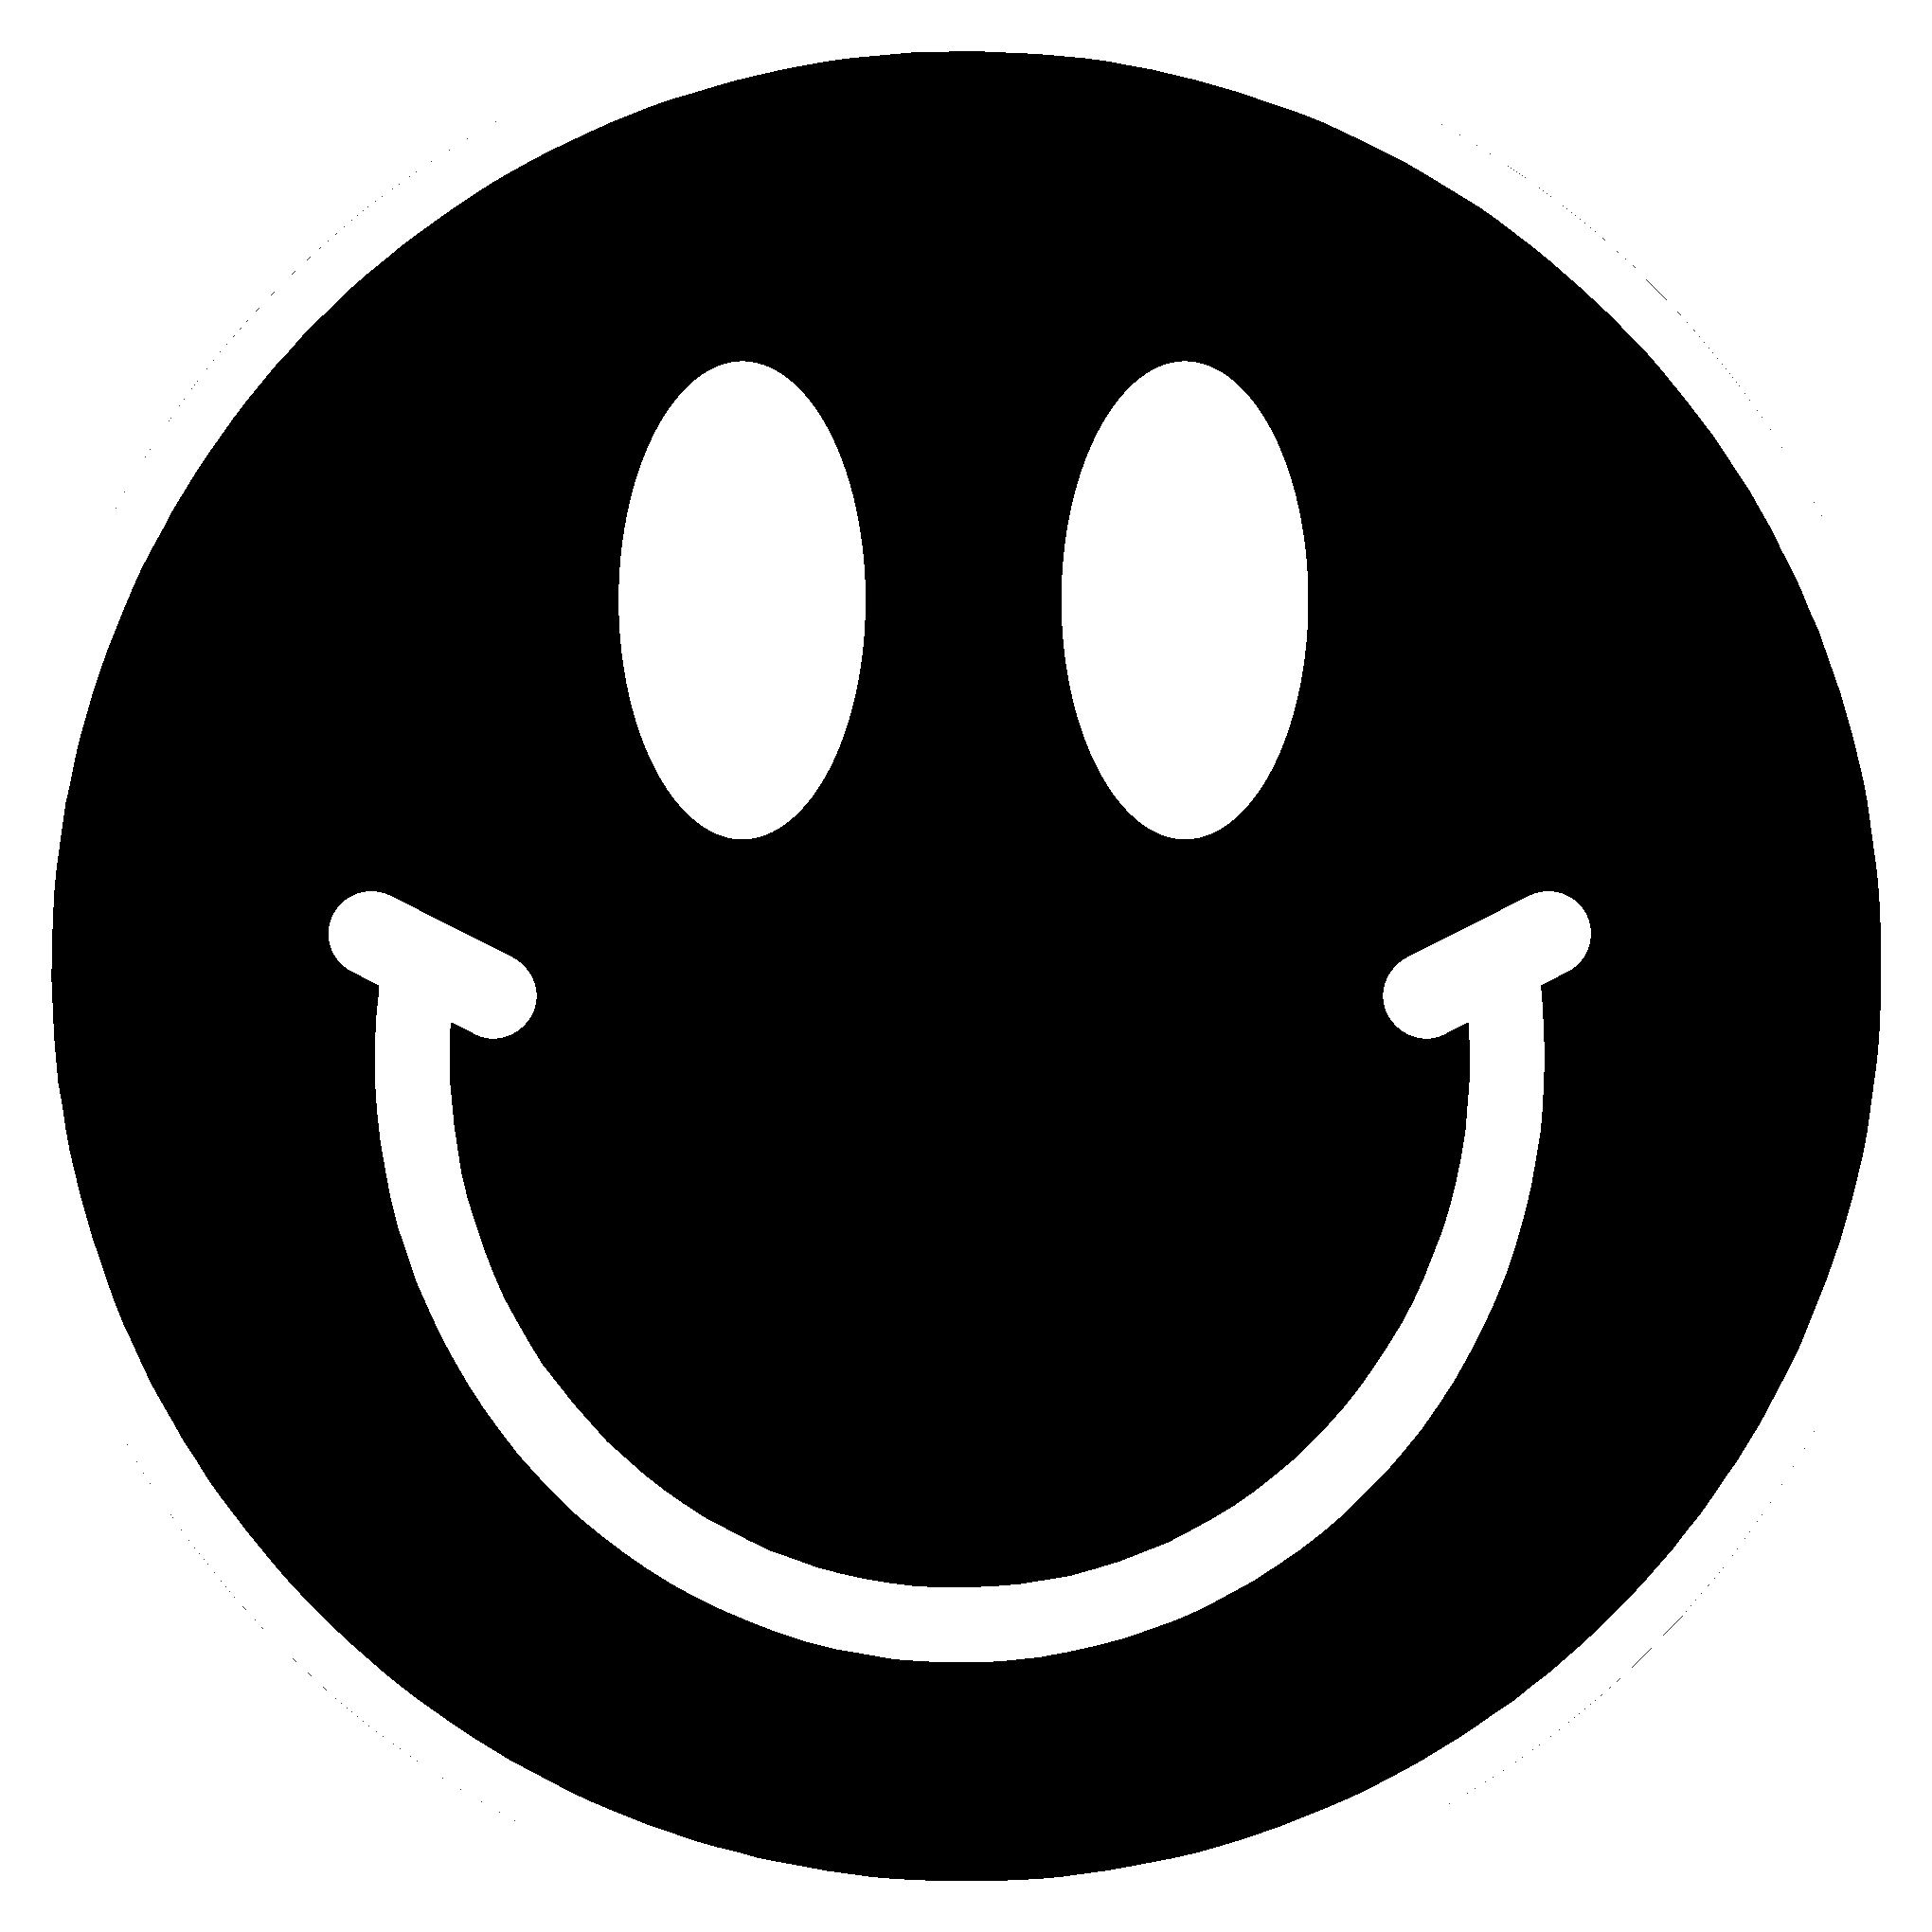 smiley face black background Free cliparts that you can download